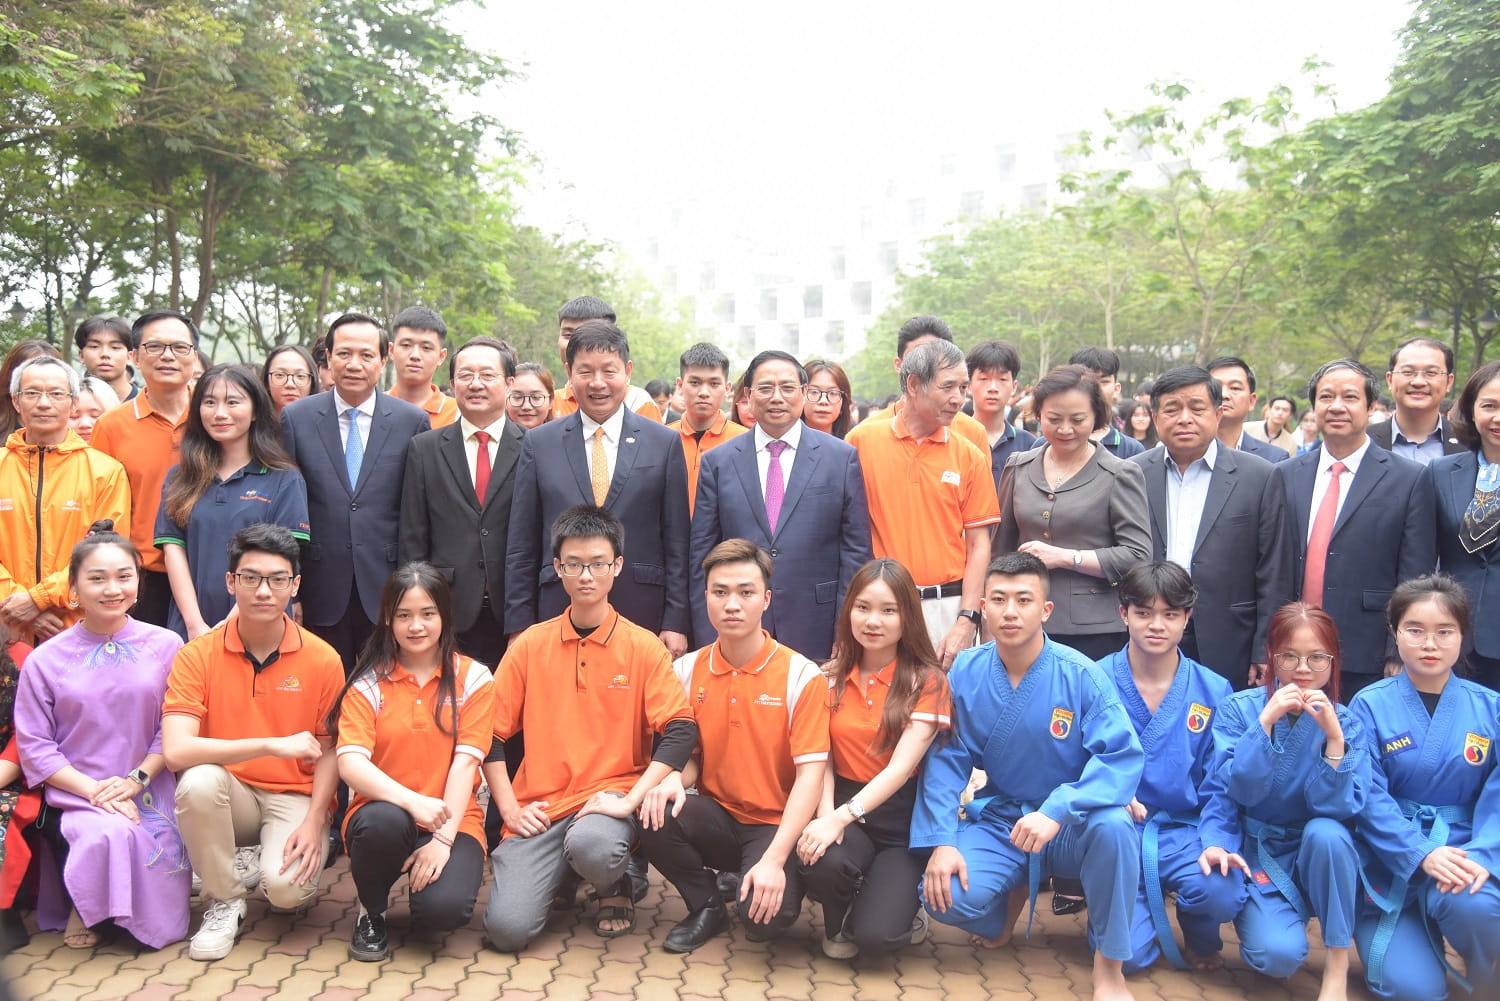 Prime Minister Pham Minh Chinh expressed interest in education and high-tech workforce training at FPT University